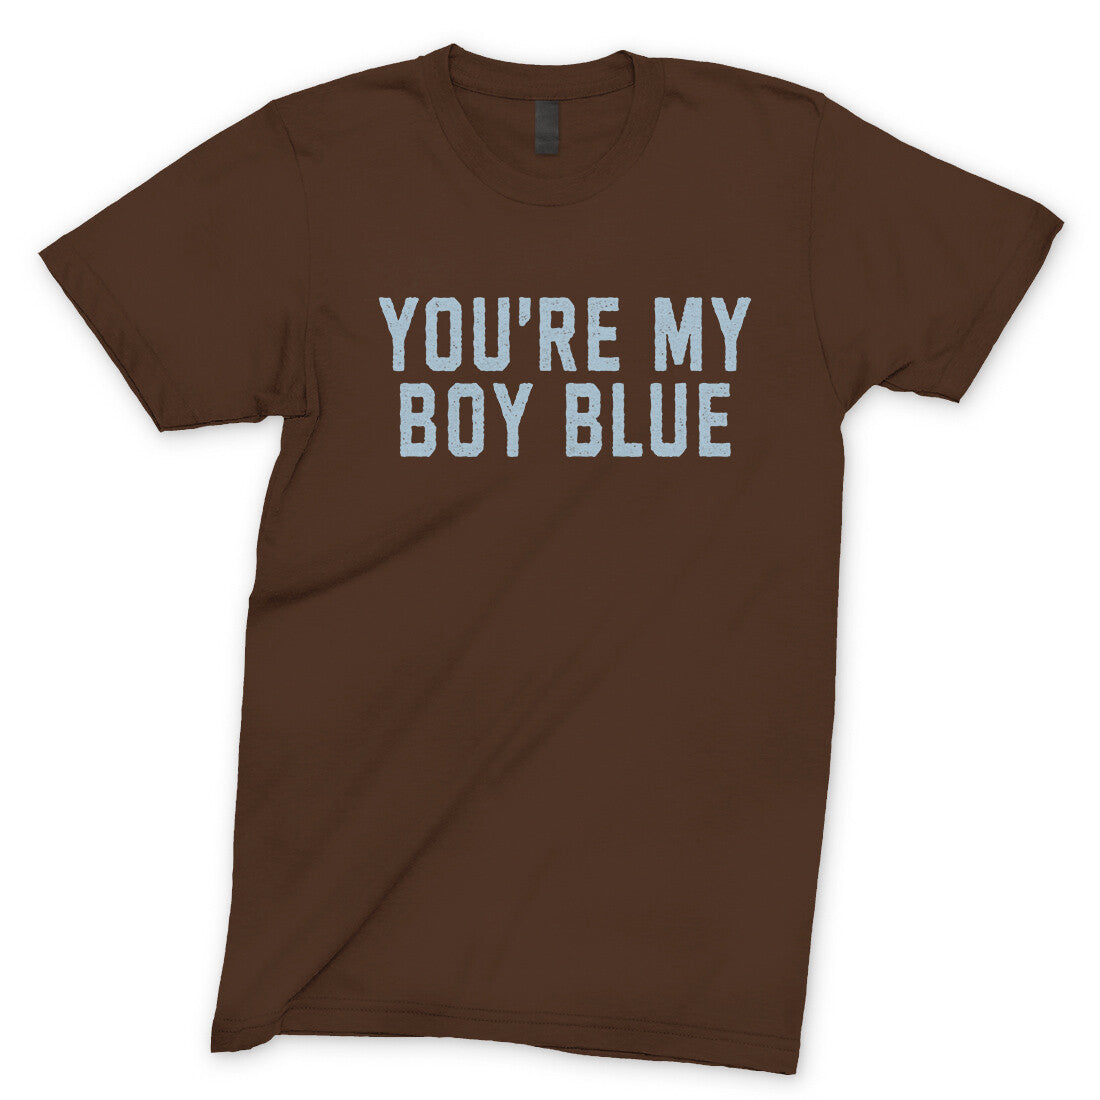 You're my Boy Blue in Dark Chocolate Color